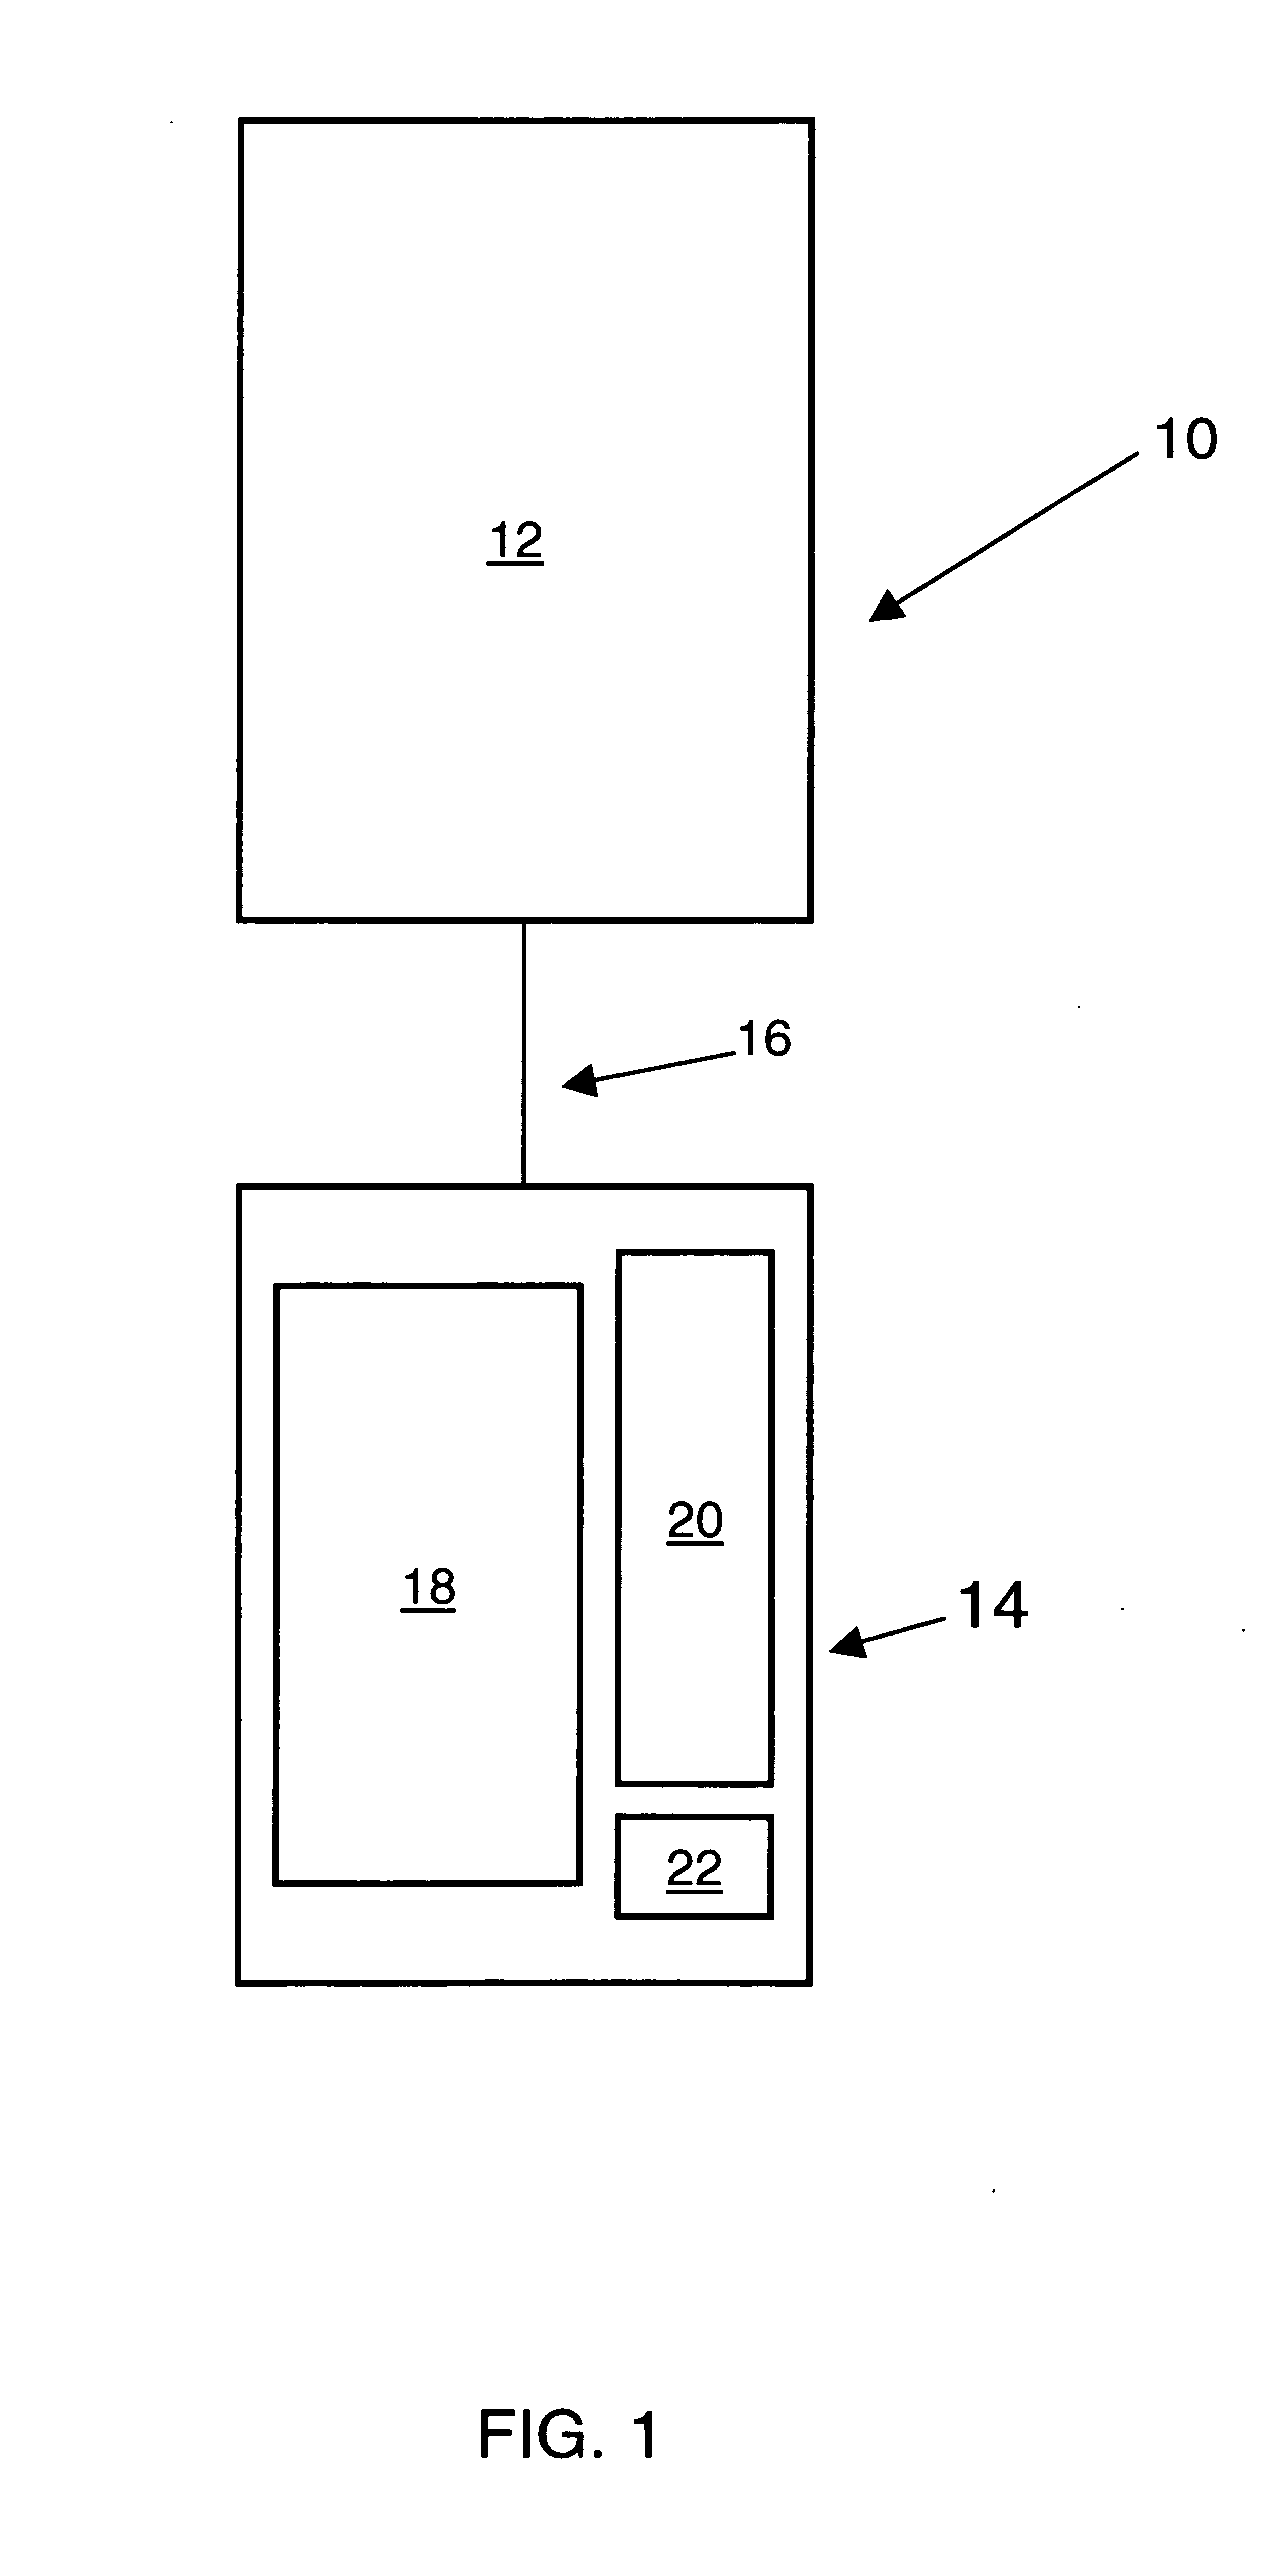 Video jukebox apparatus and a method of playing music and music videos using a video jukebox appartus